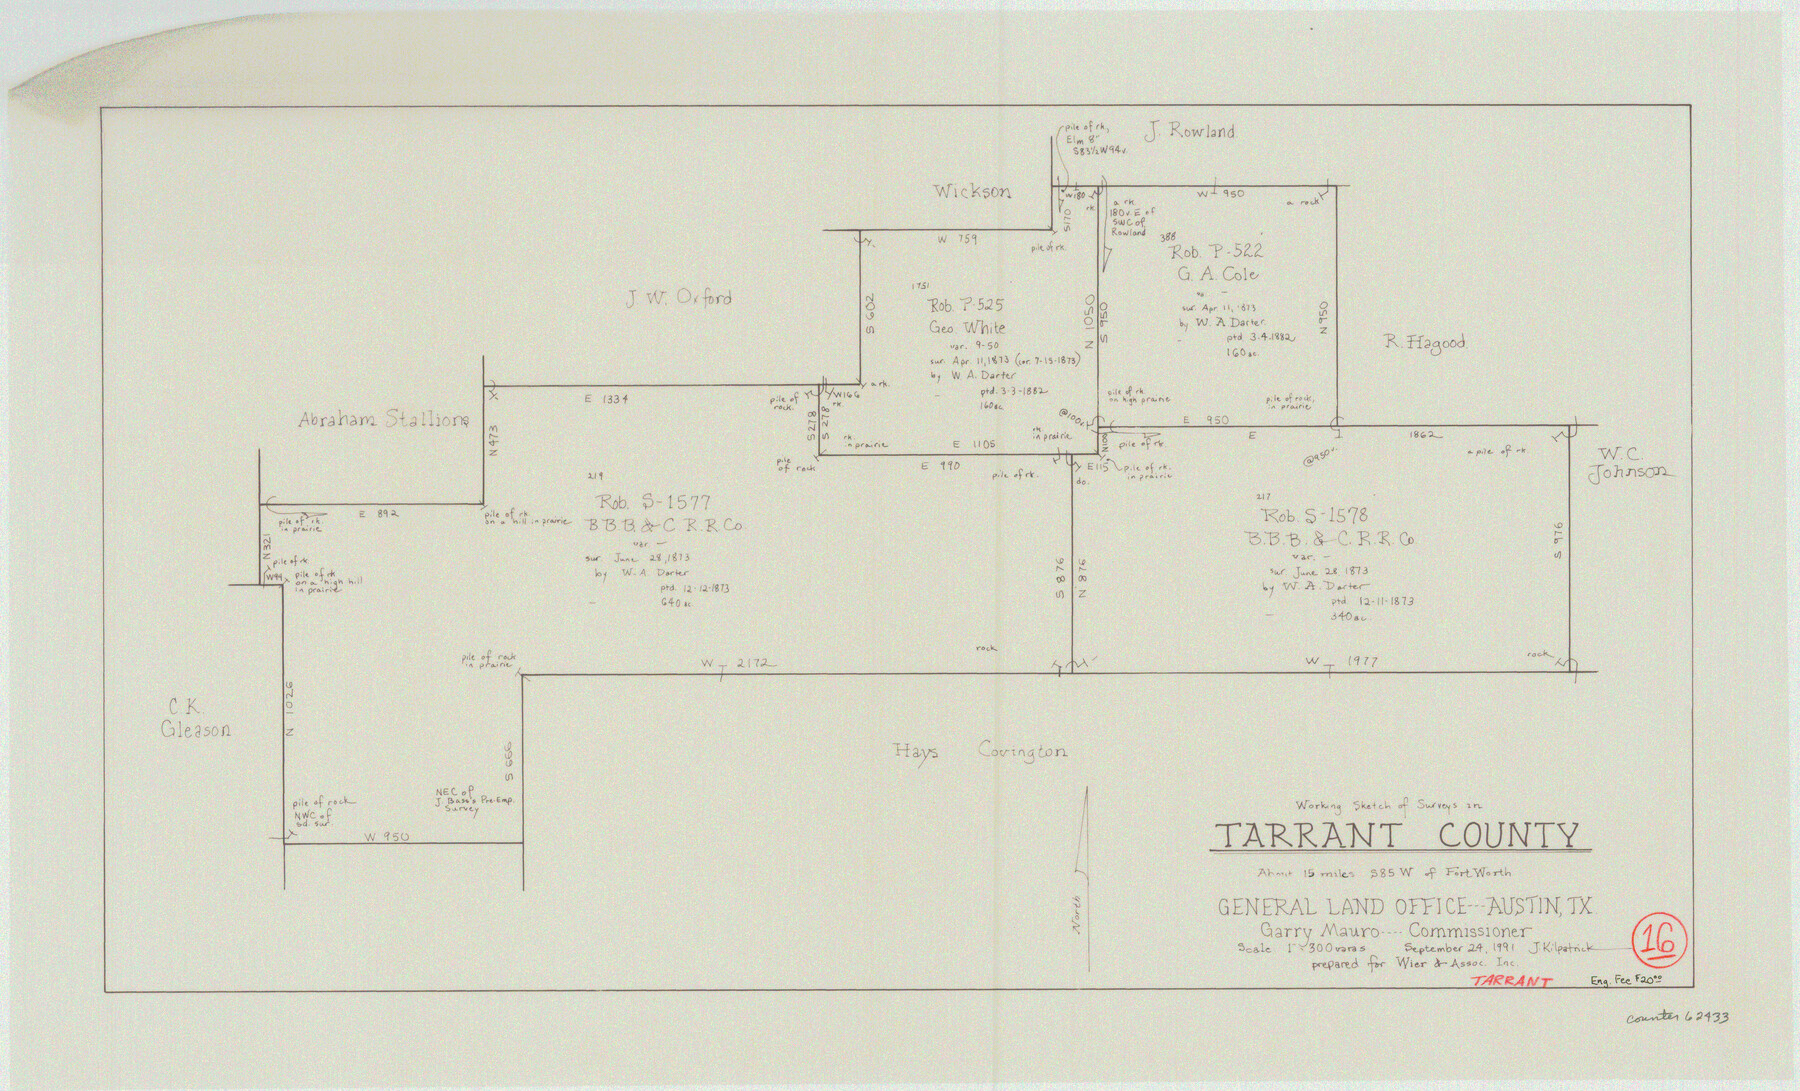 62433, Tarrant County Working Sketch 16, General Map Collection